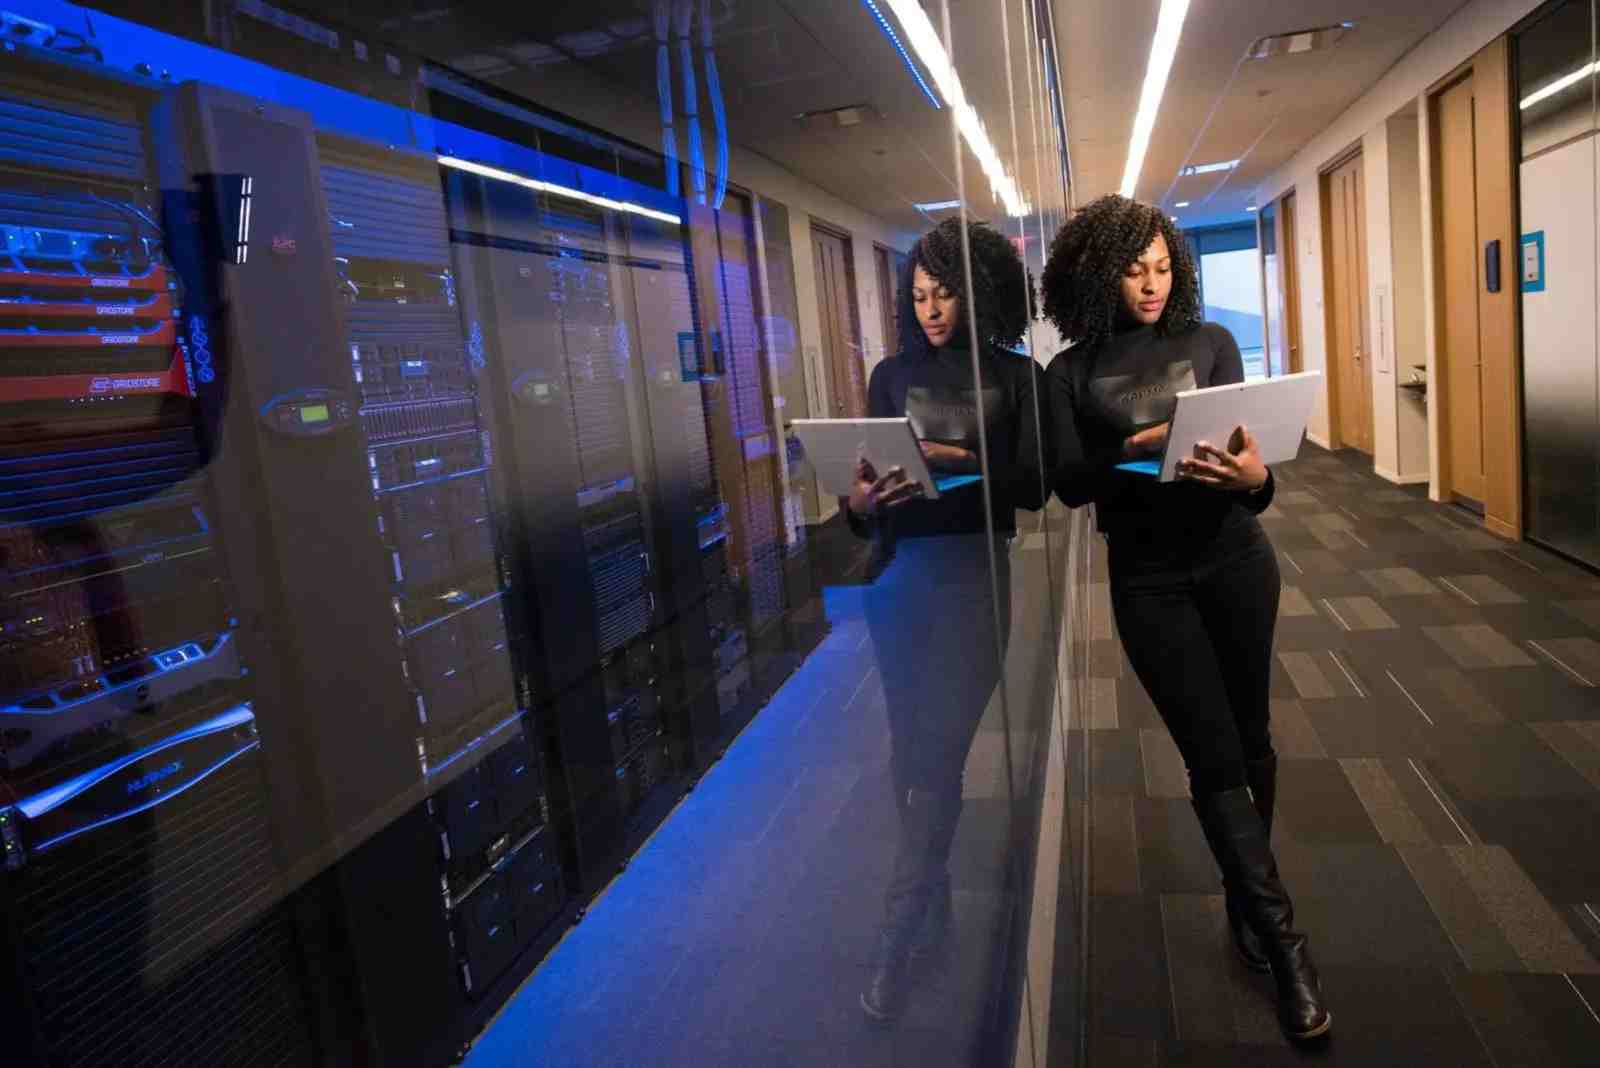 Woman on laptop next to server room